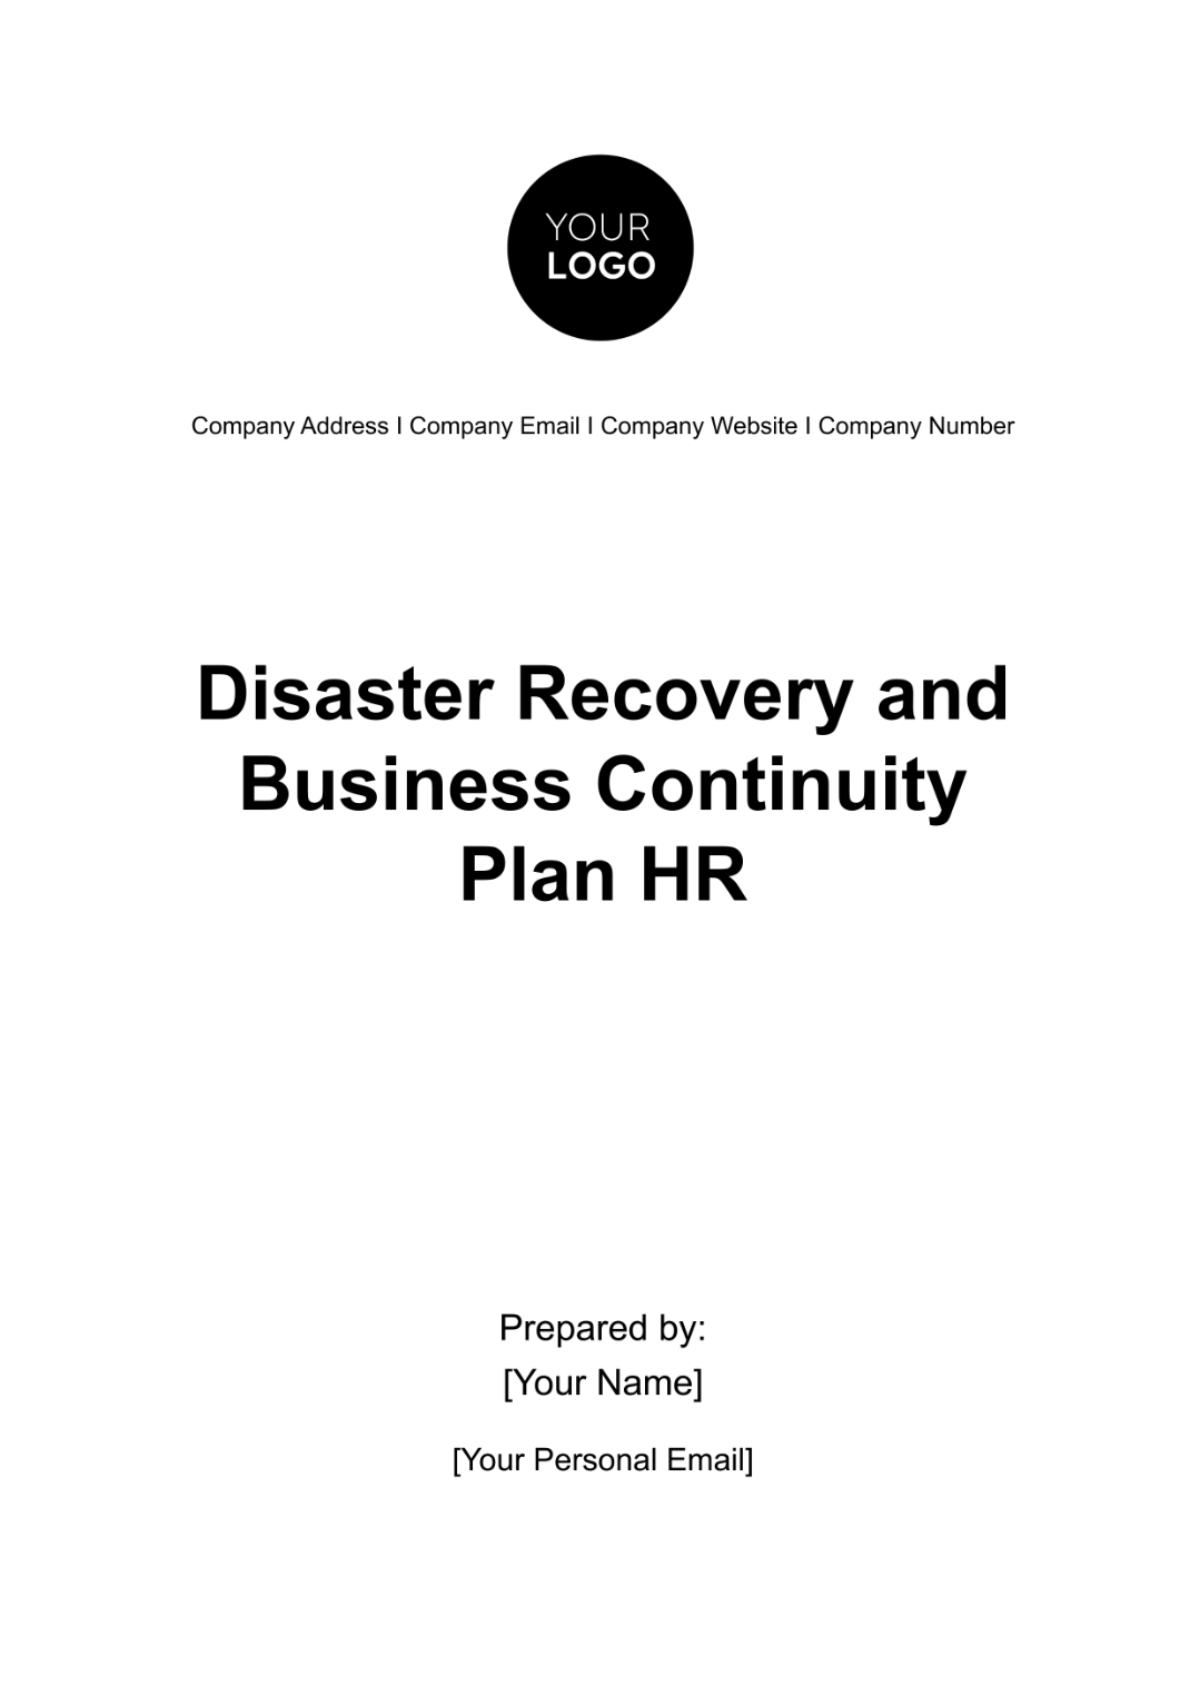 Disaster Recovery and Business Continuity Plan HR Template